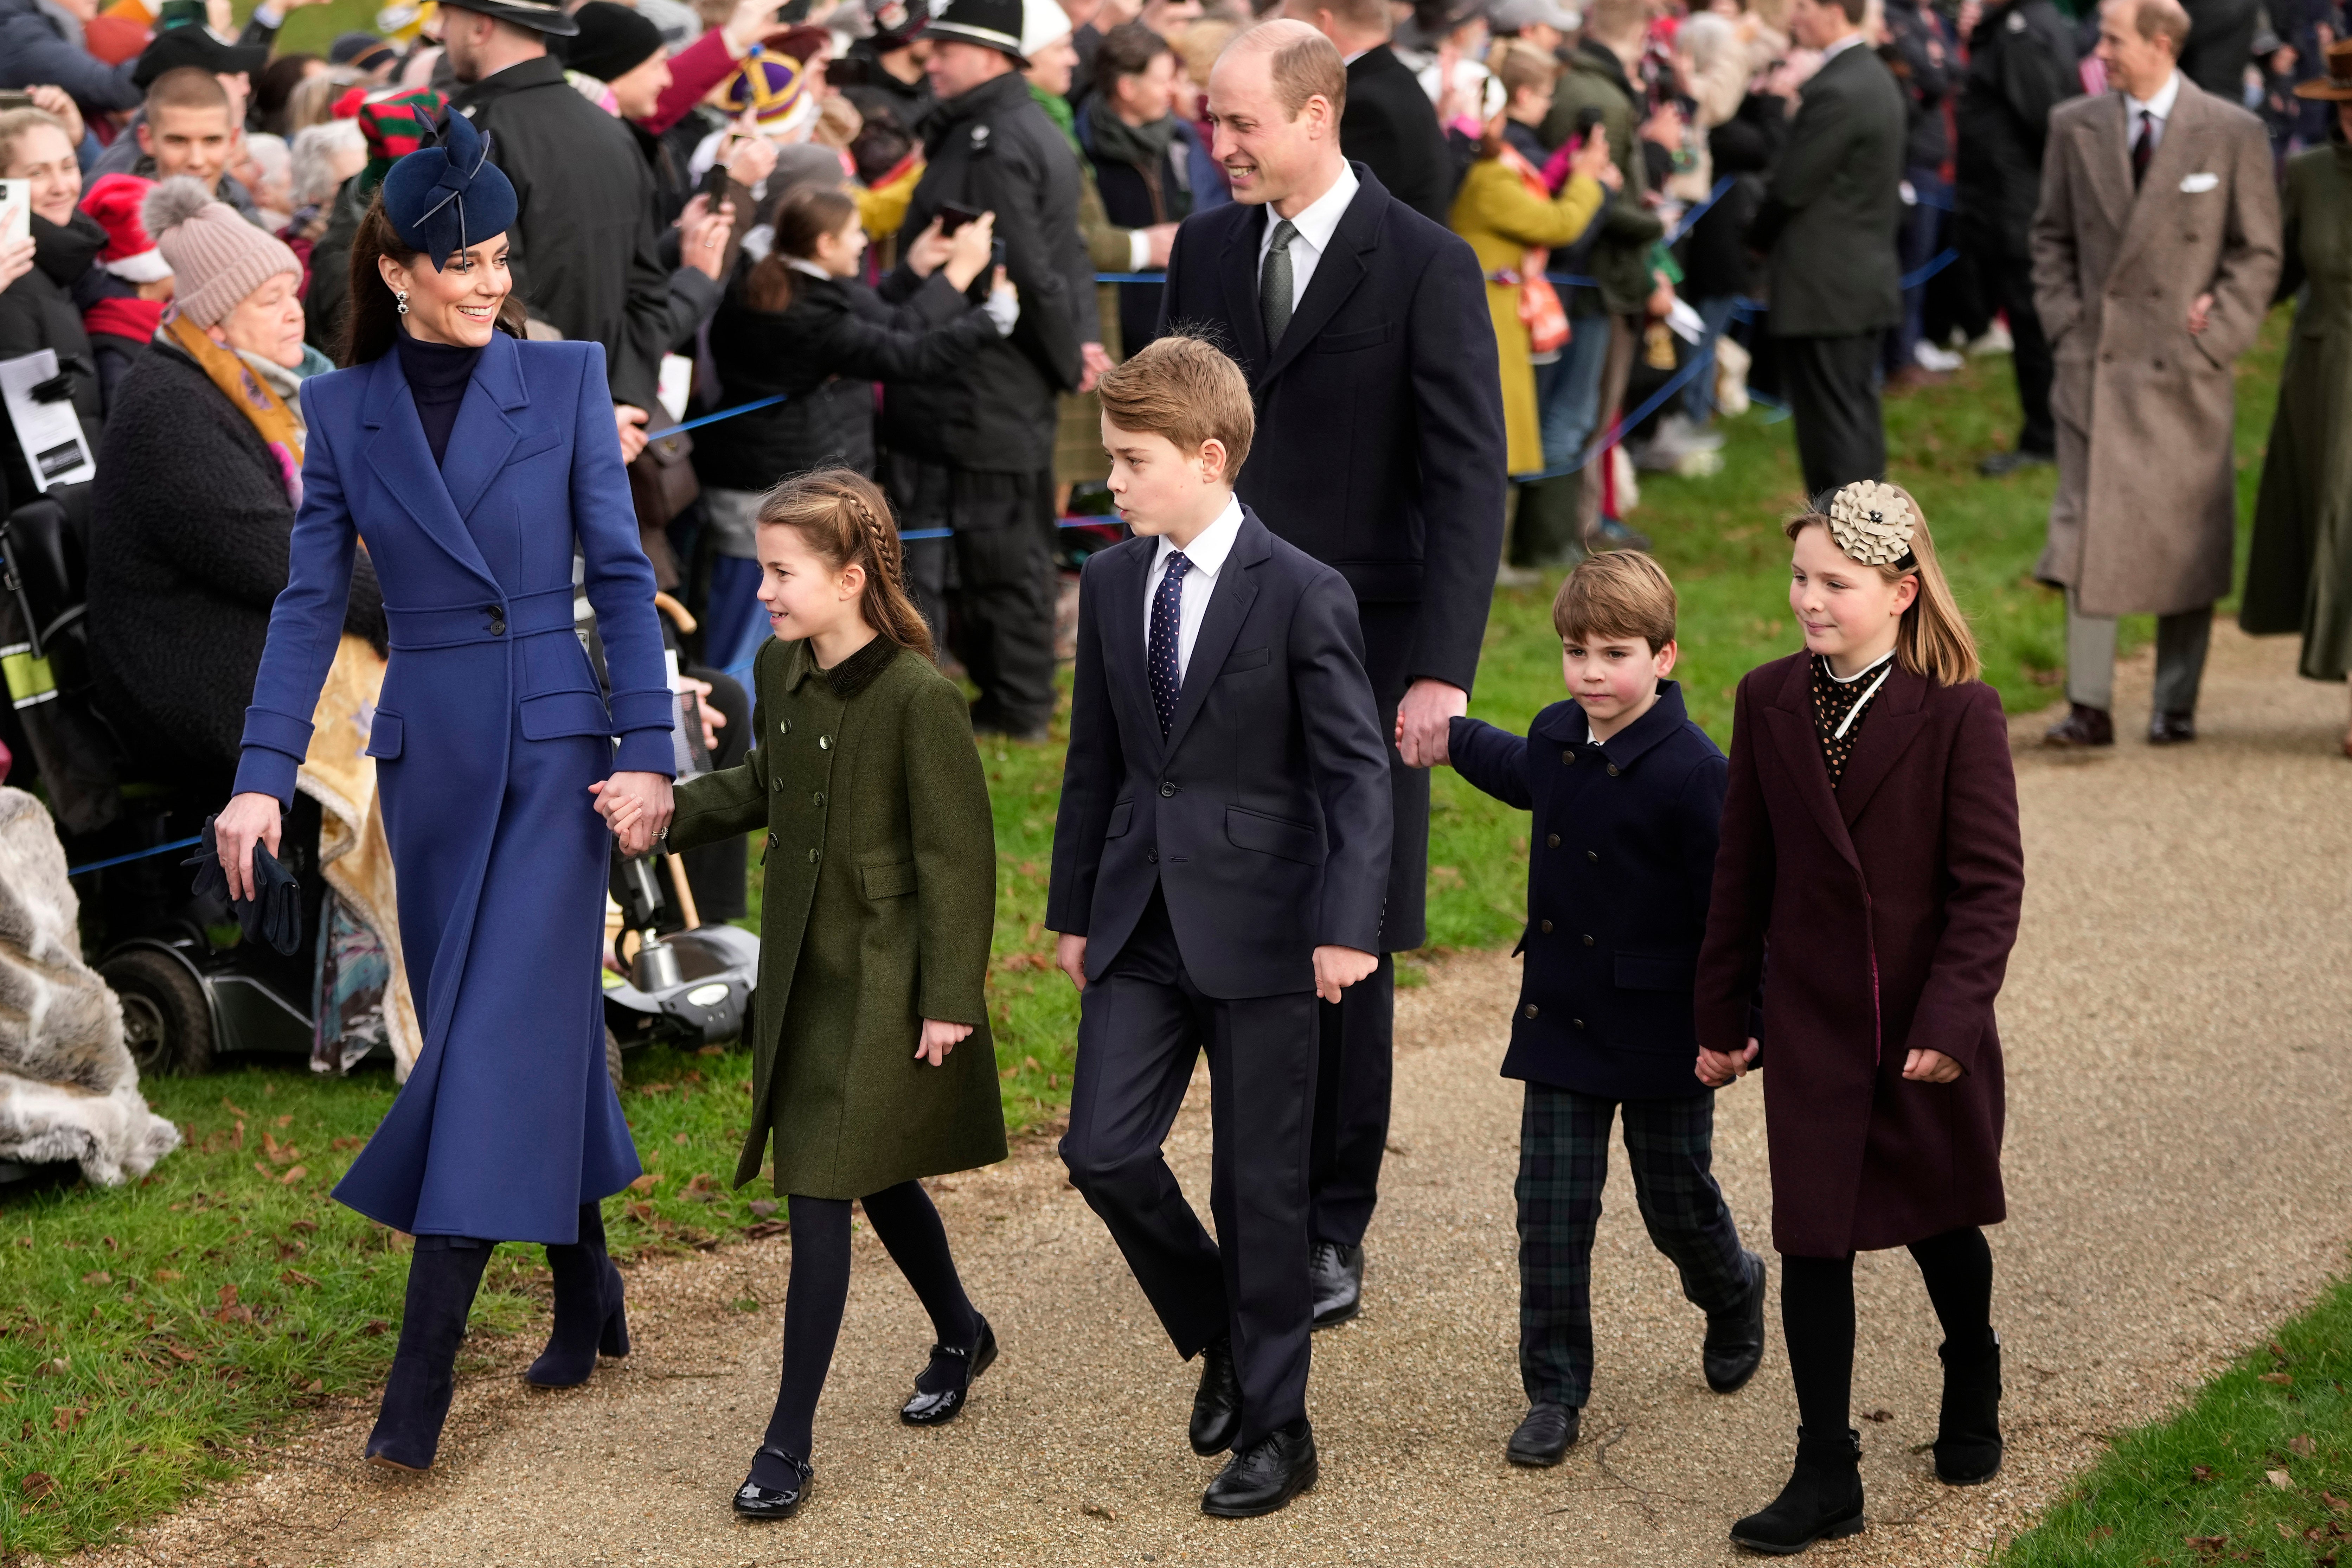 The Princess of Wales with family attend church in Sandringham on Christmas Day, her last formal royal engagement